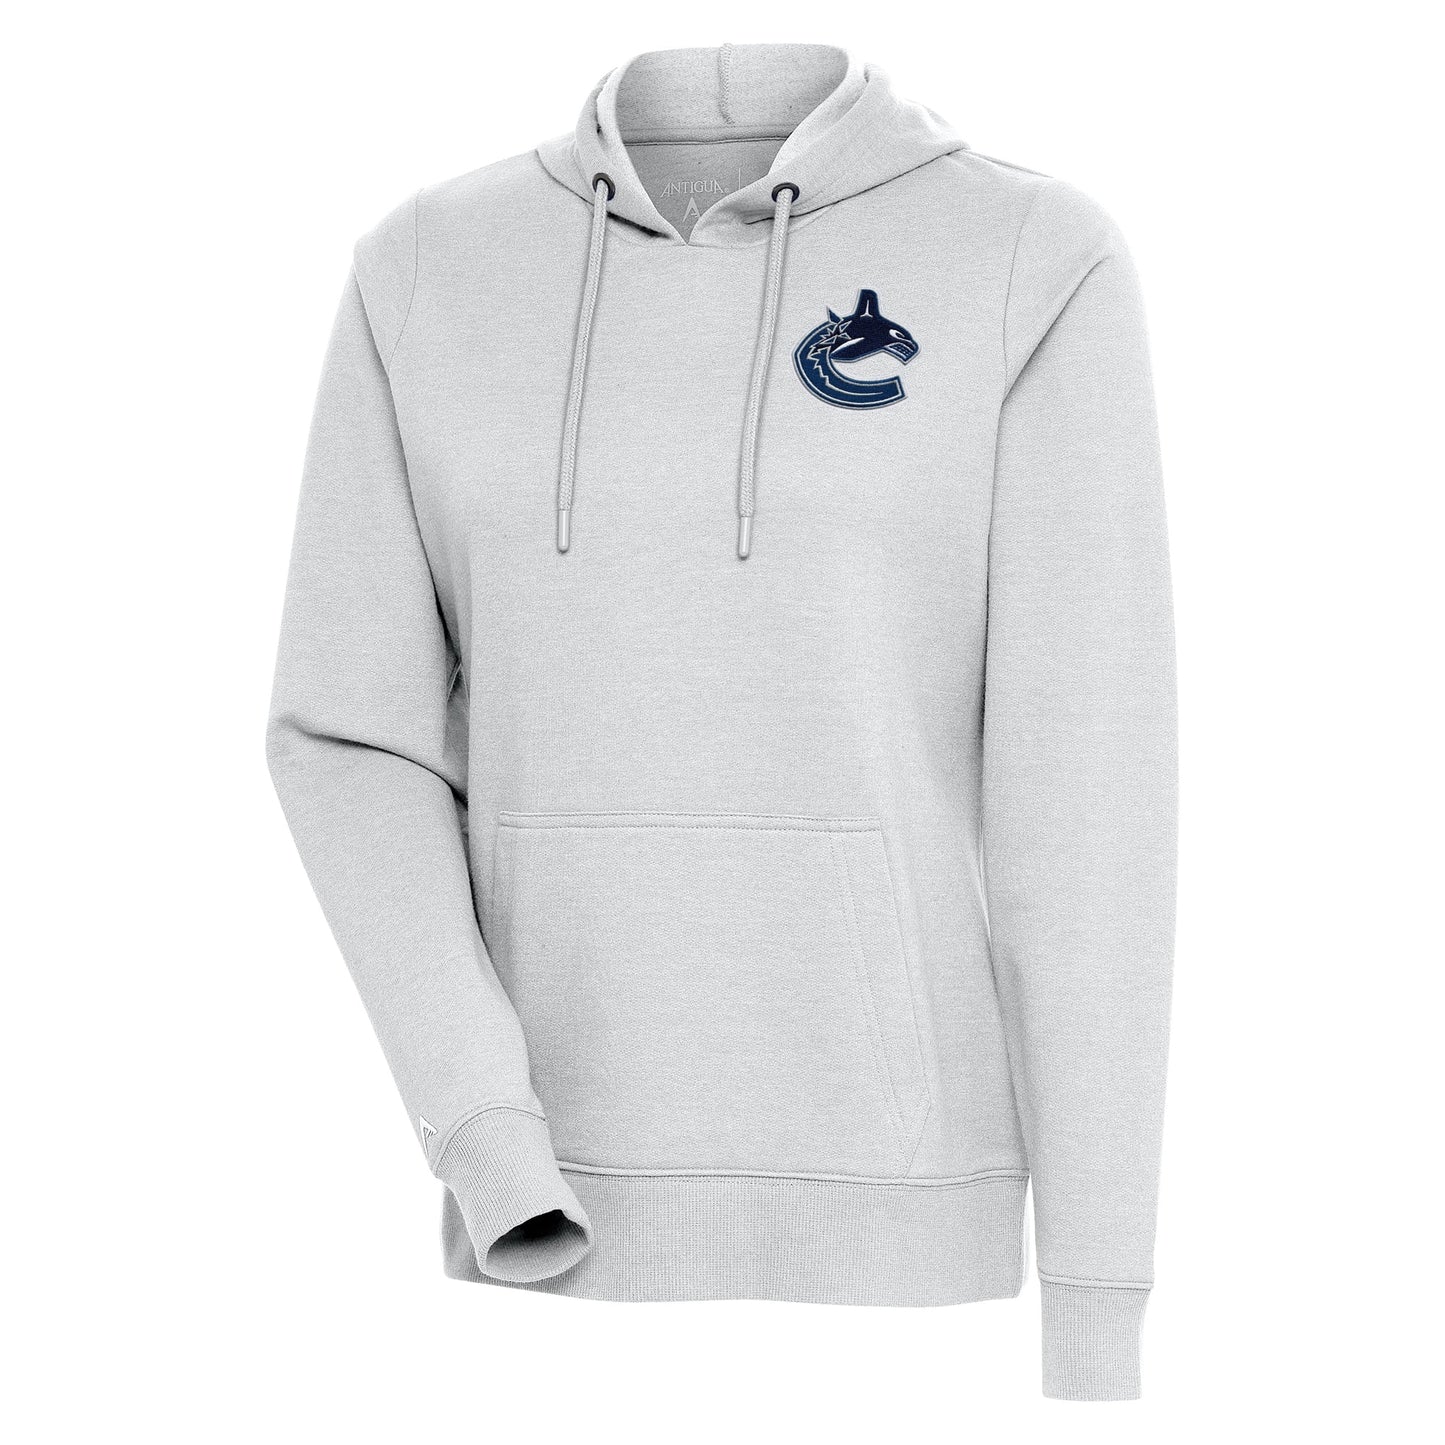 Women's Antigua Heather Gray Vancouver Canucks Action Chenille Pullover Hoodie